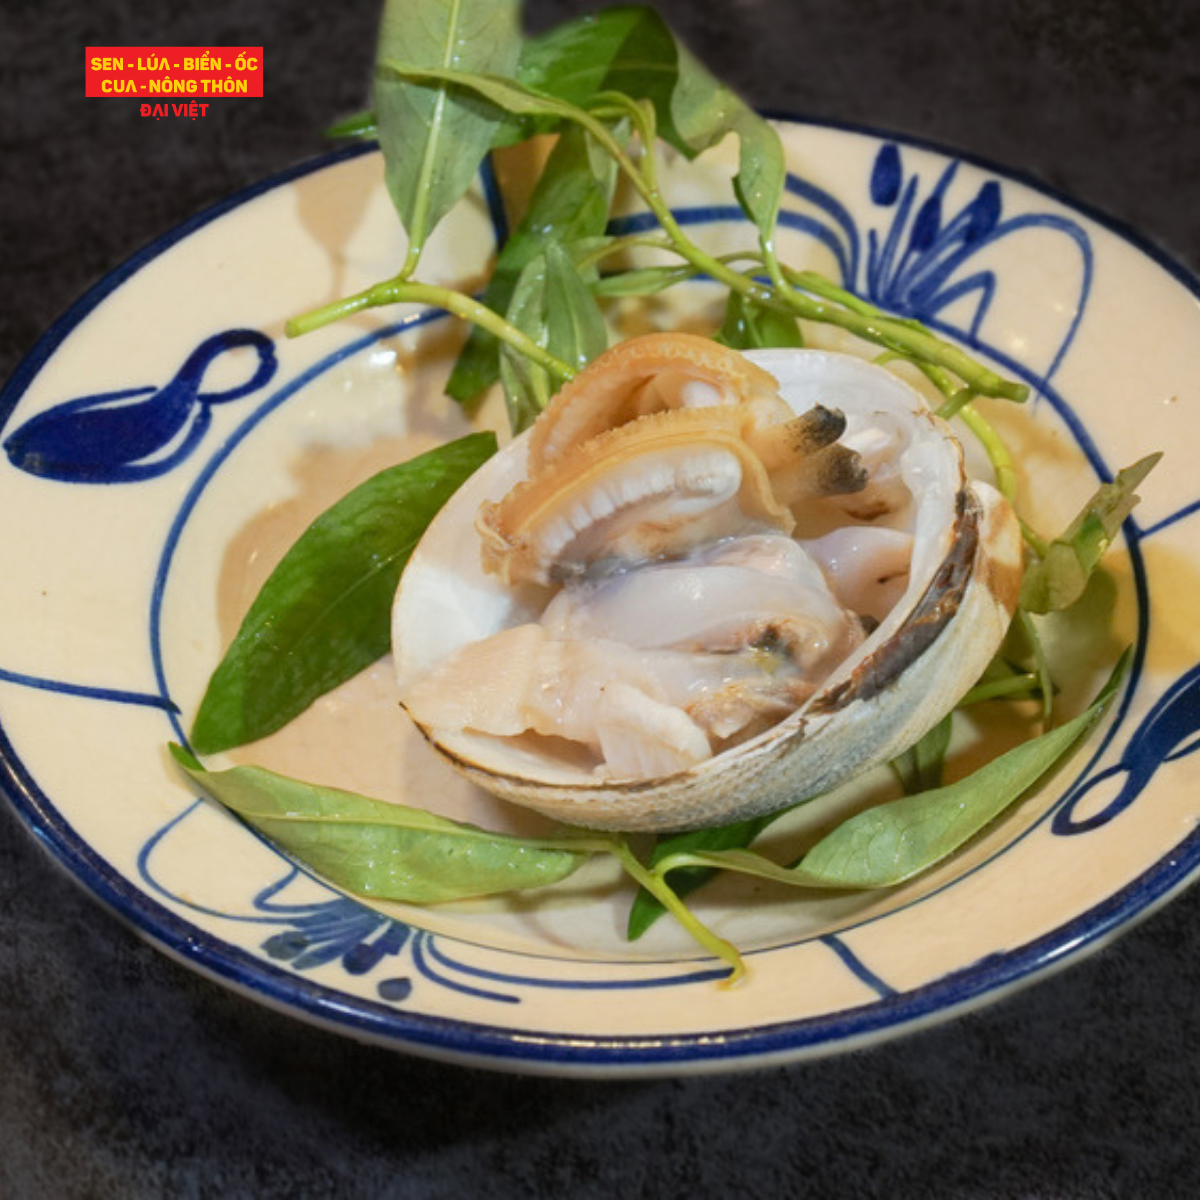  Grilled Giant Clam Without Spices - Sò Tộ Nướng Mọi 